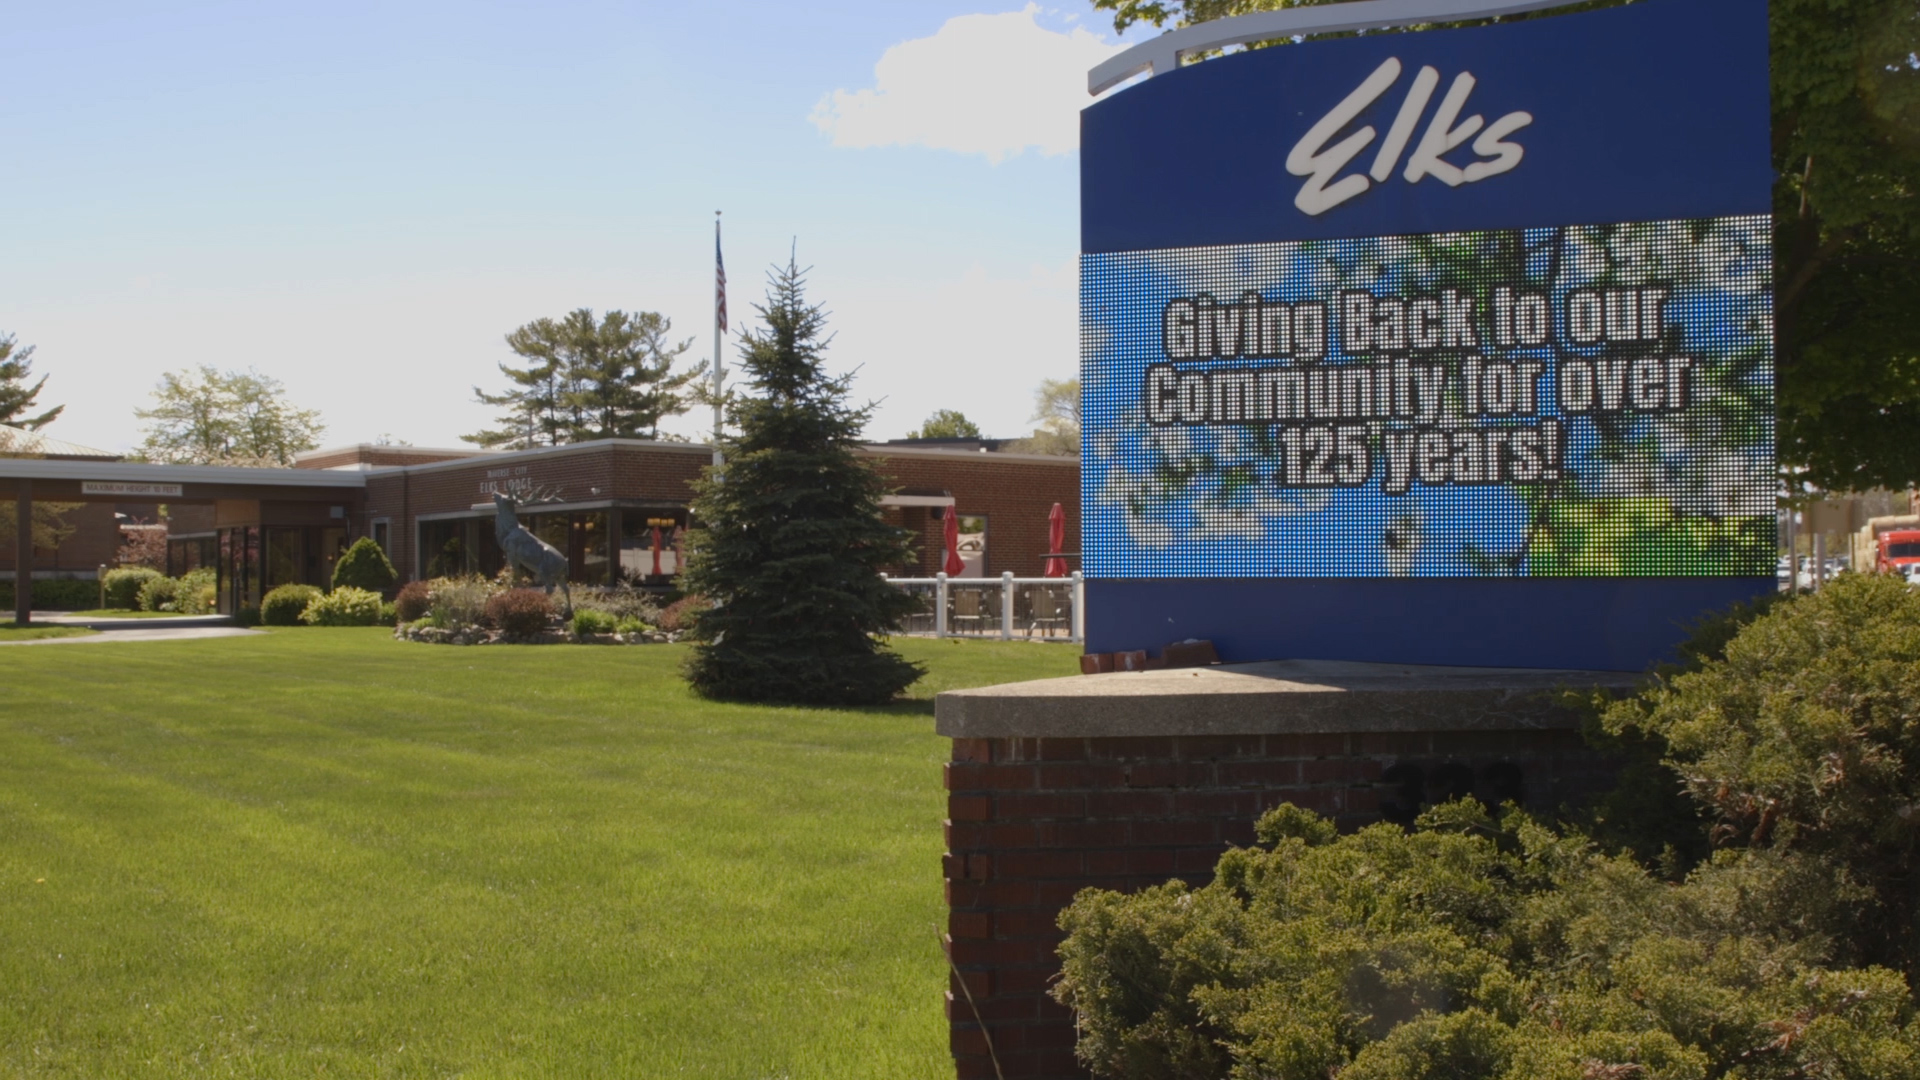 Elks Lodge in Traverse City holds fundraiser for new TCPD bikes